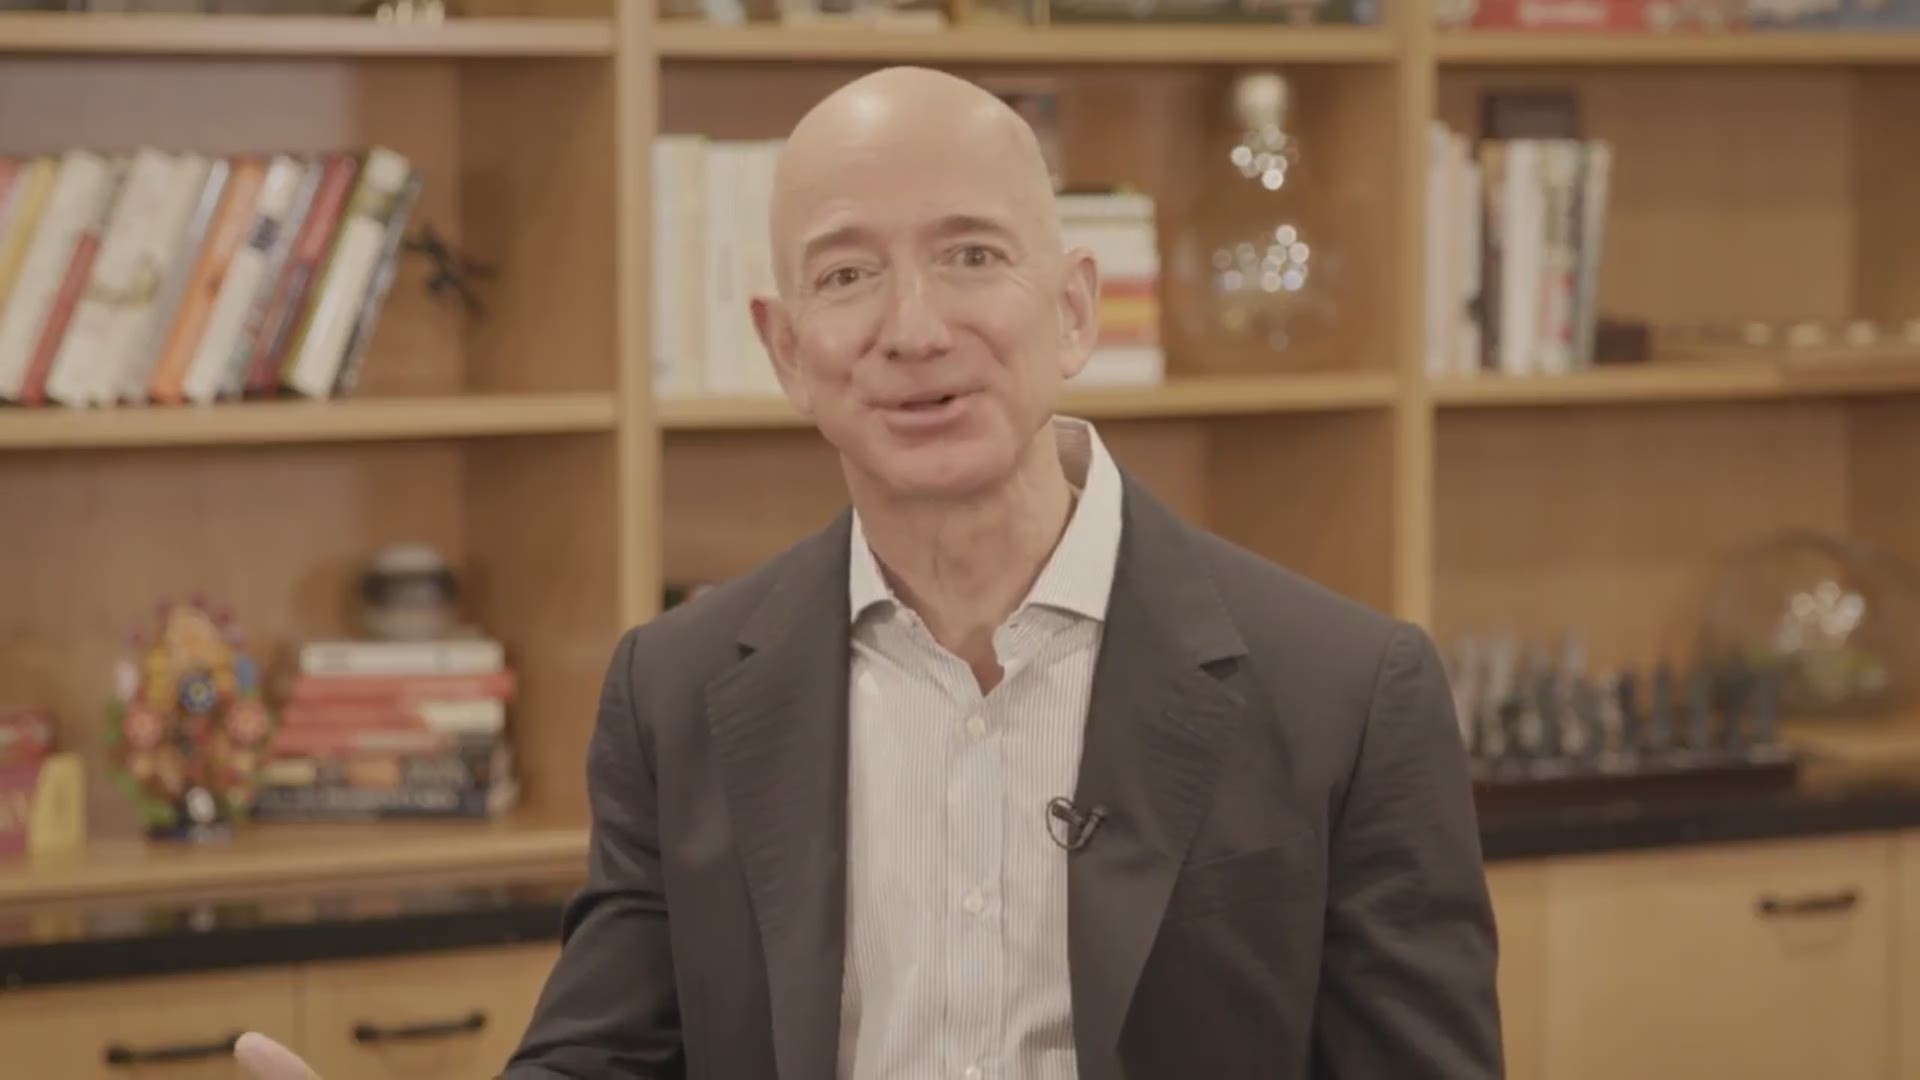 In a sweet video, Amazon CEO Jeff Bezos surprised his Houston elementary school teacher with a special message for her 80th birthday.